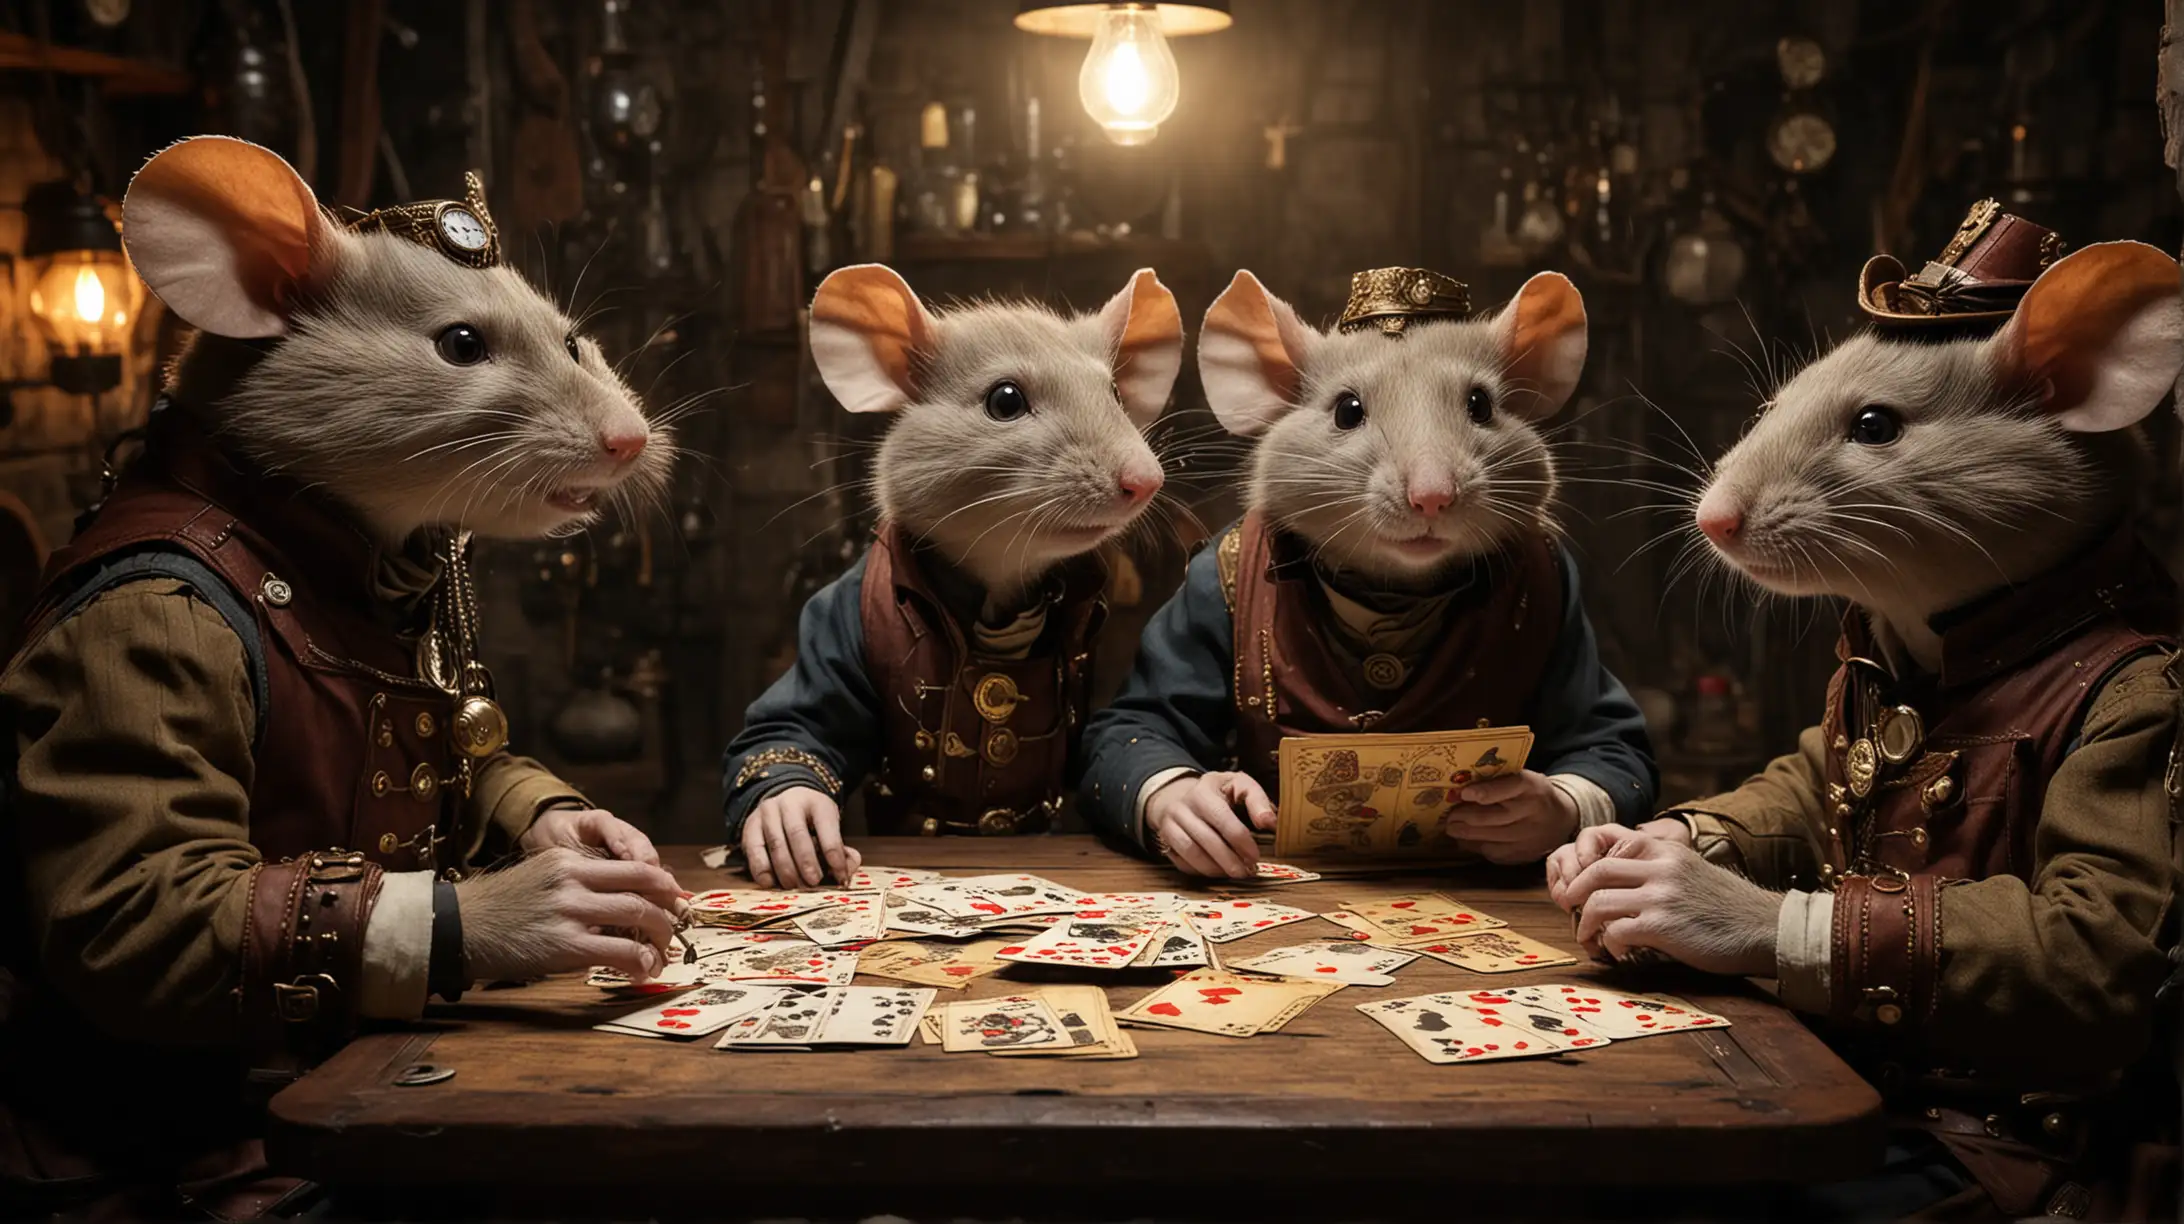 Steampunk Rats Playing Cards in Illuminated Cellar